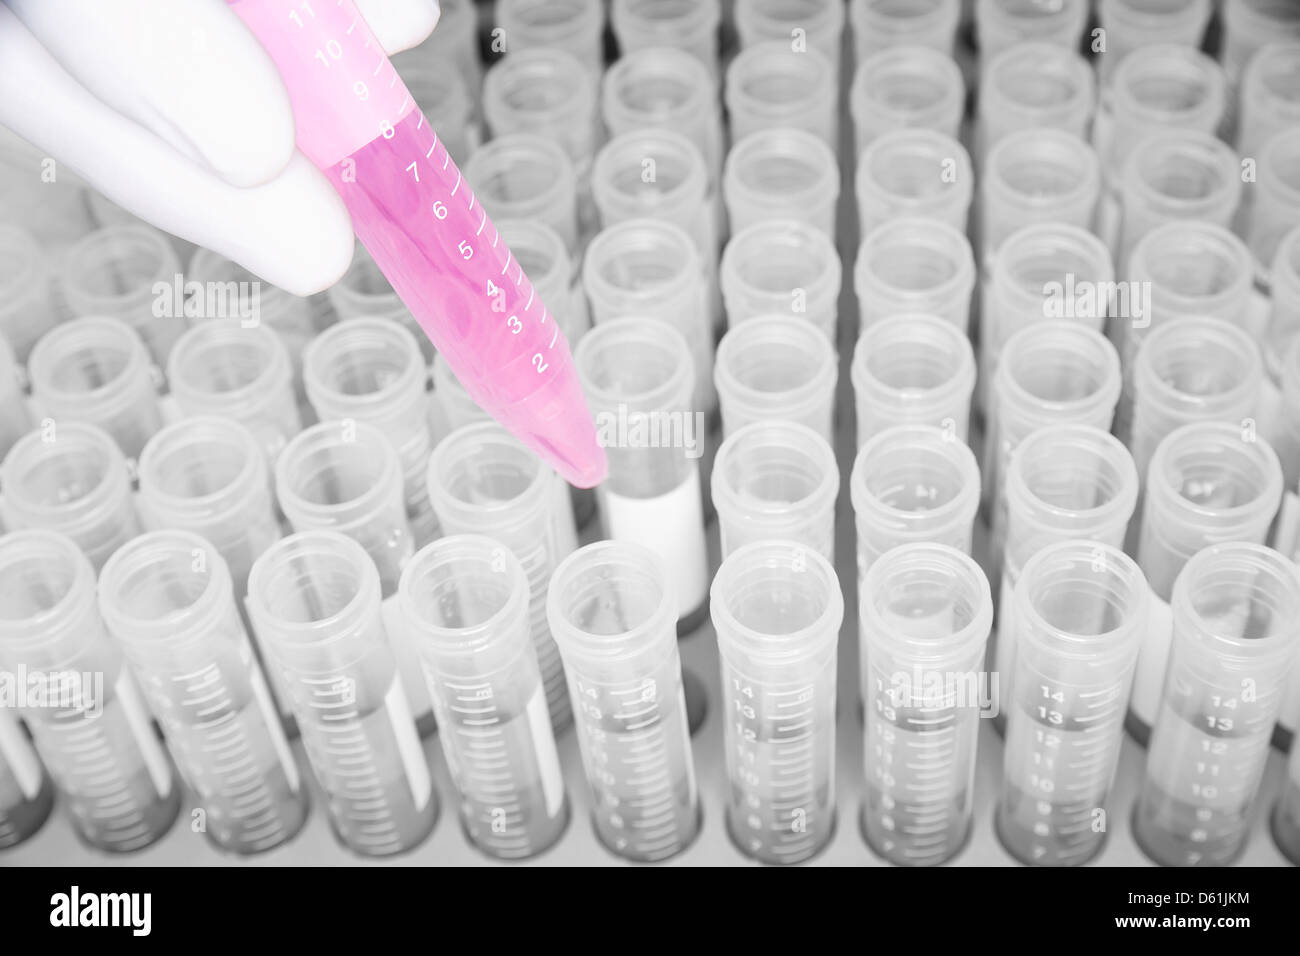 Lab worker dding pink liquid containers in laboratory Stock Photo